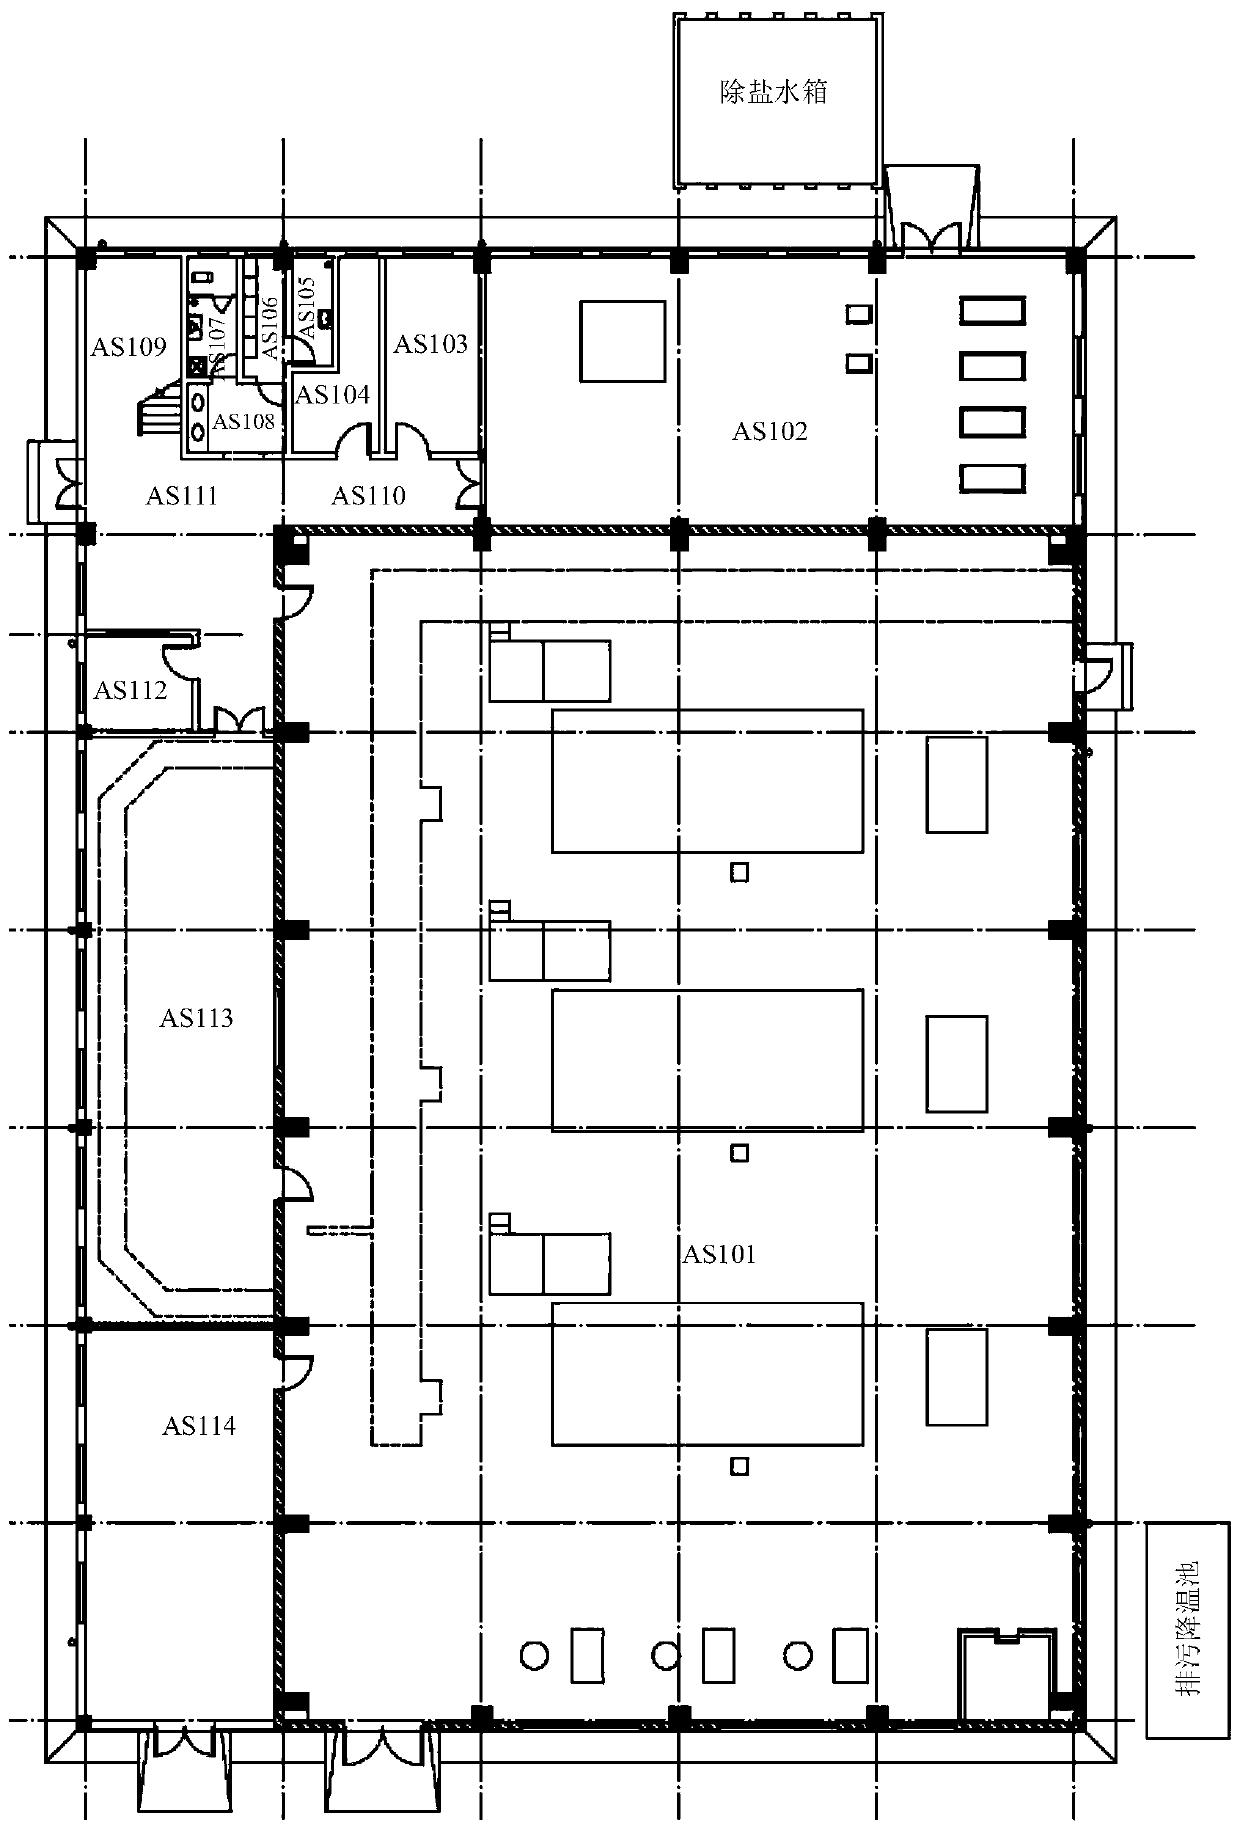 Arrangement structure of nuclear power station oil and gas boiler room